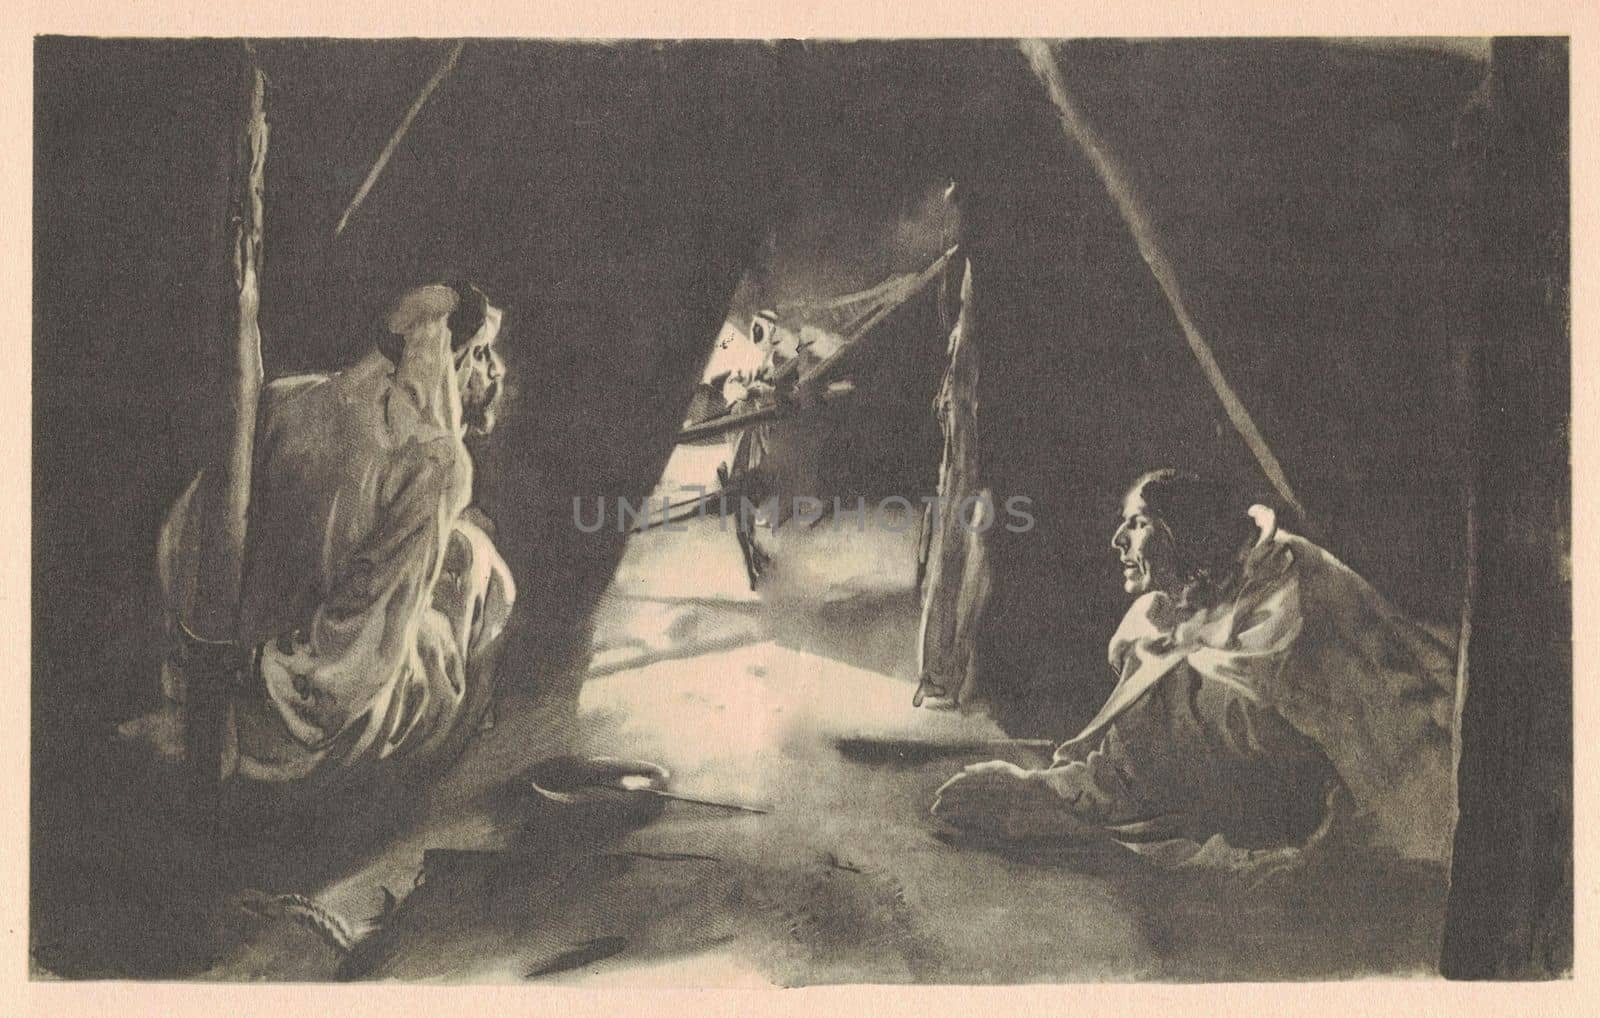 Black and white illustration shows a captured Arab man in the Bedouin tent. Vintage black and white picture shows adventure life in the previous century.